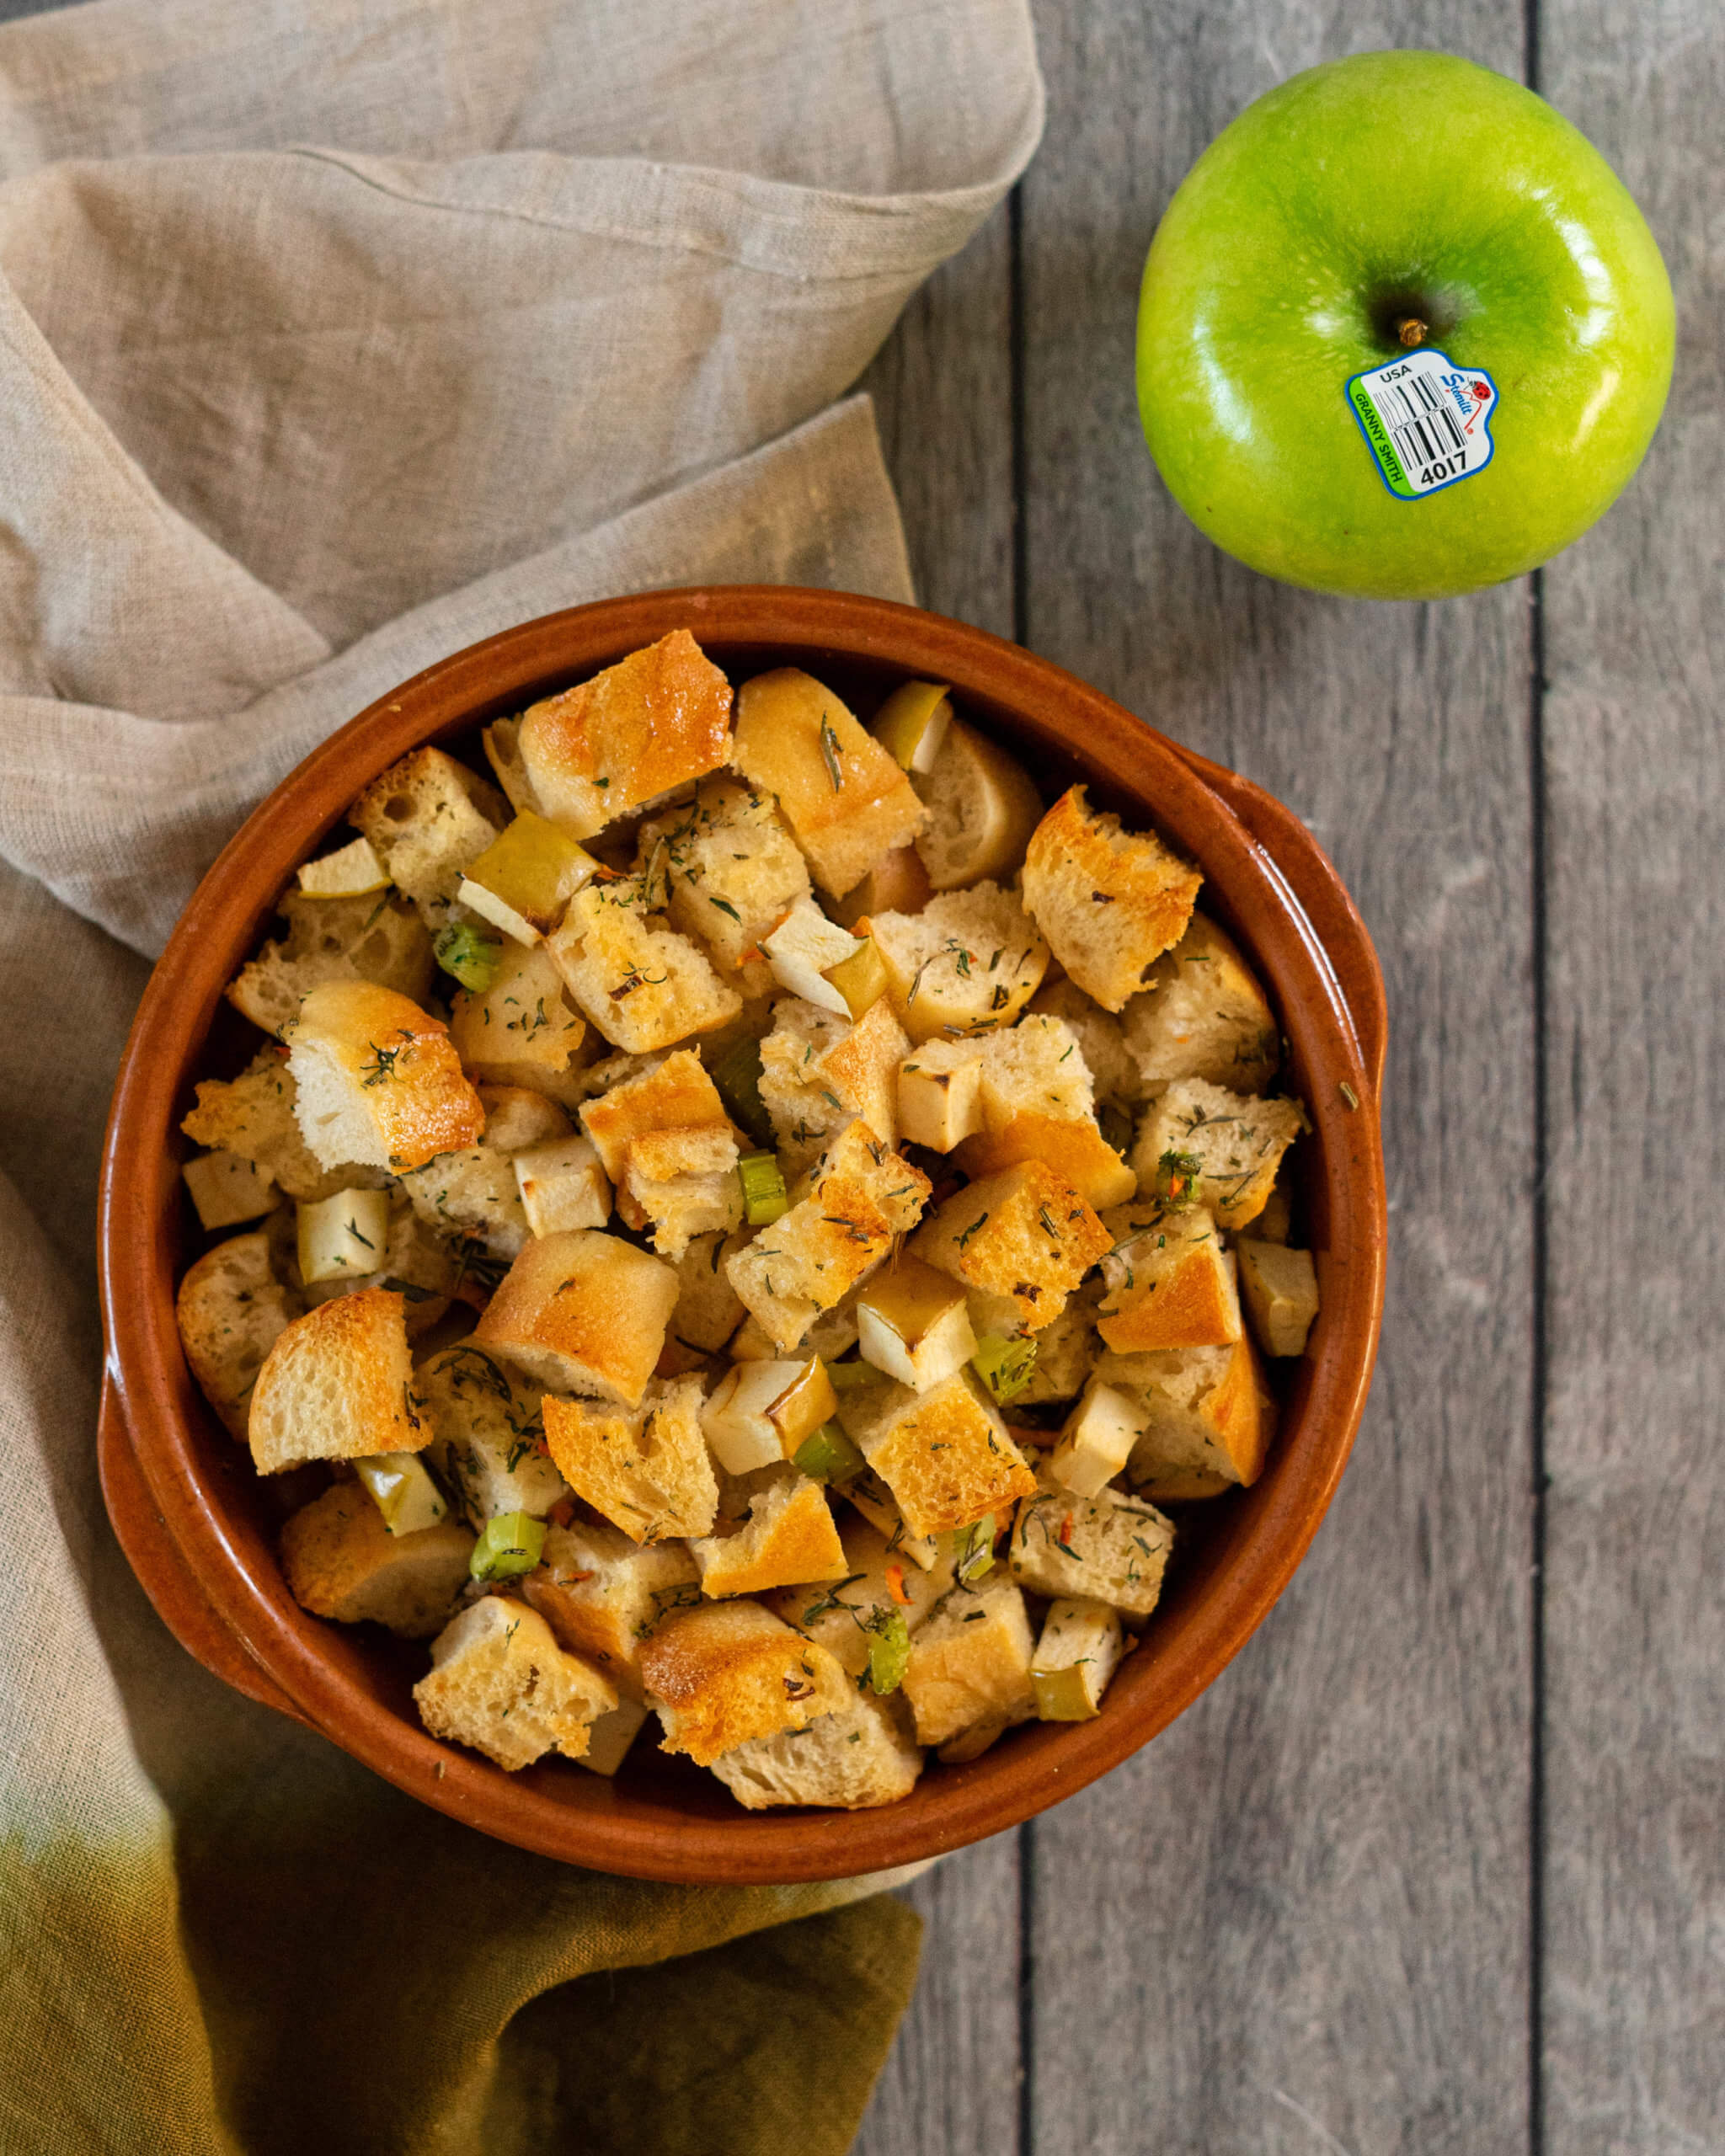 Sourdough stuffing in a bowl with a granny smith apple beside it.